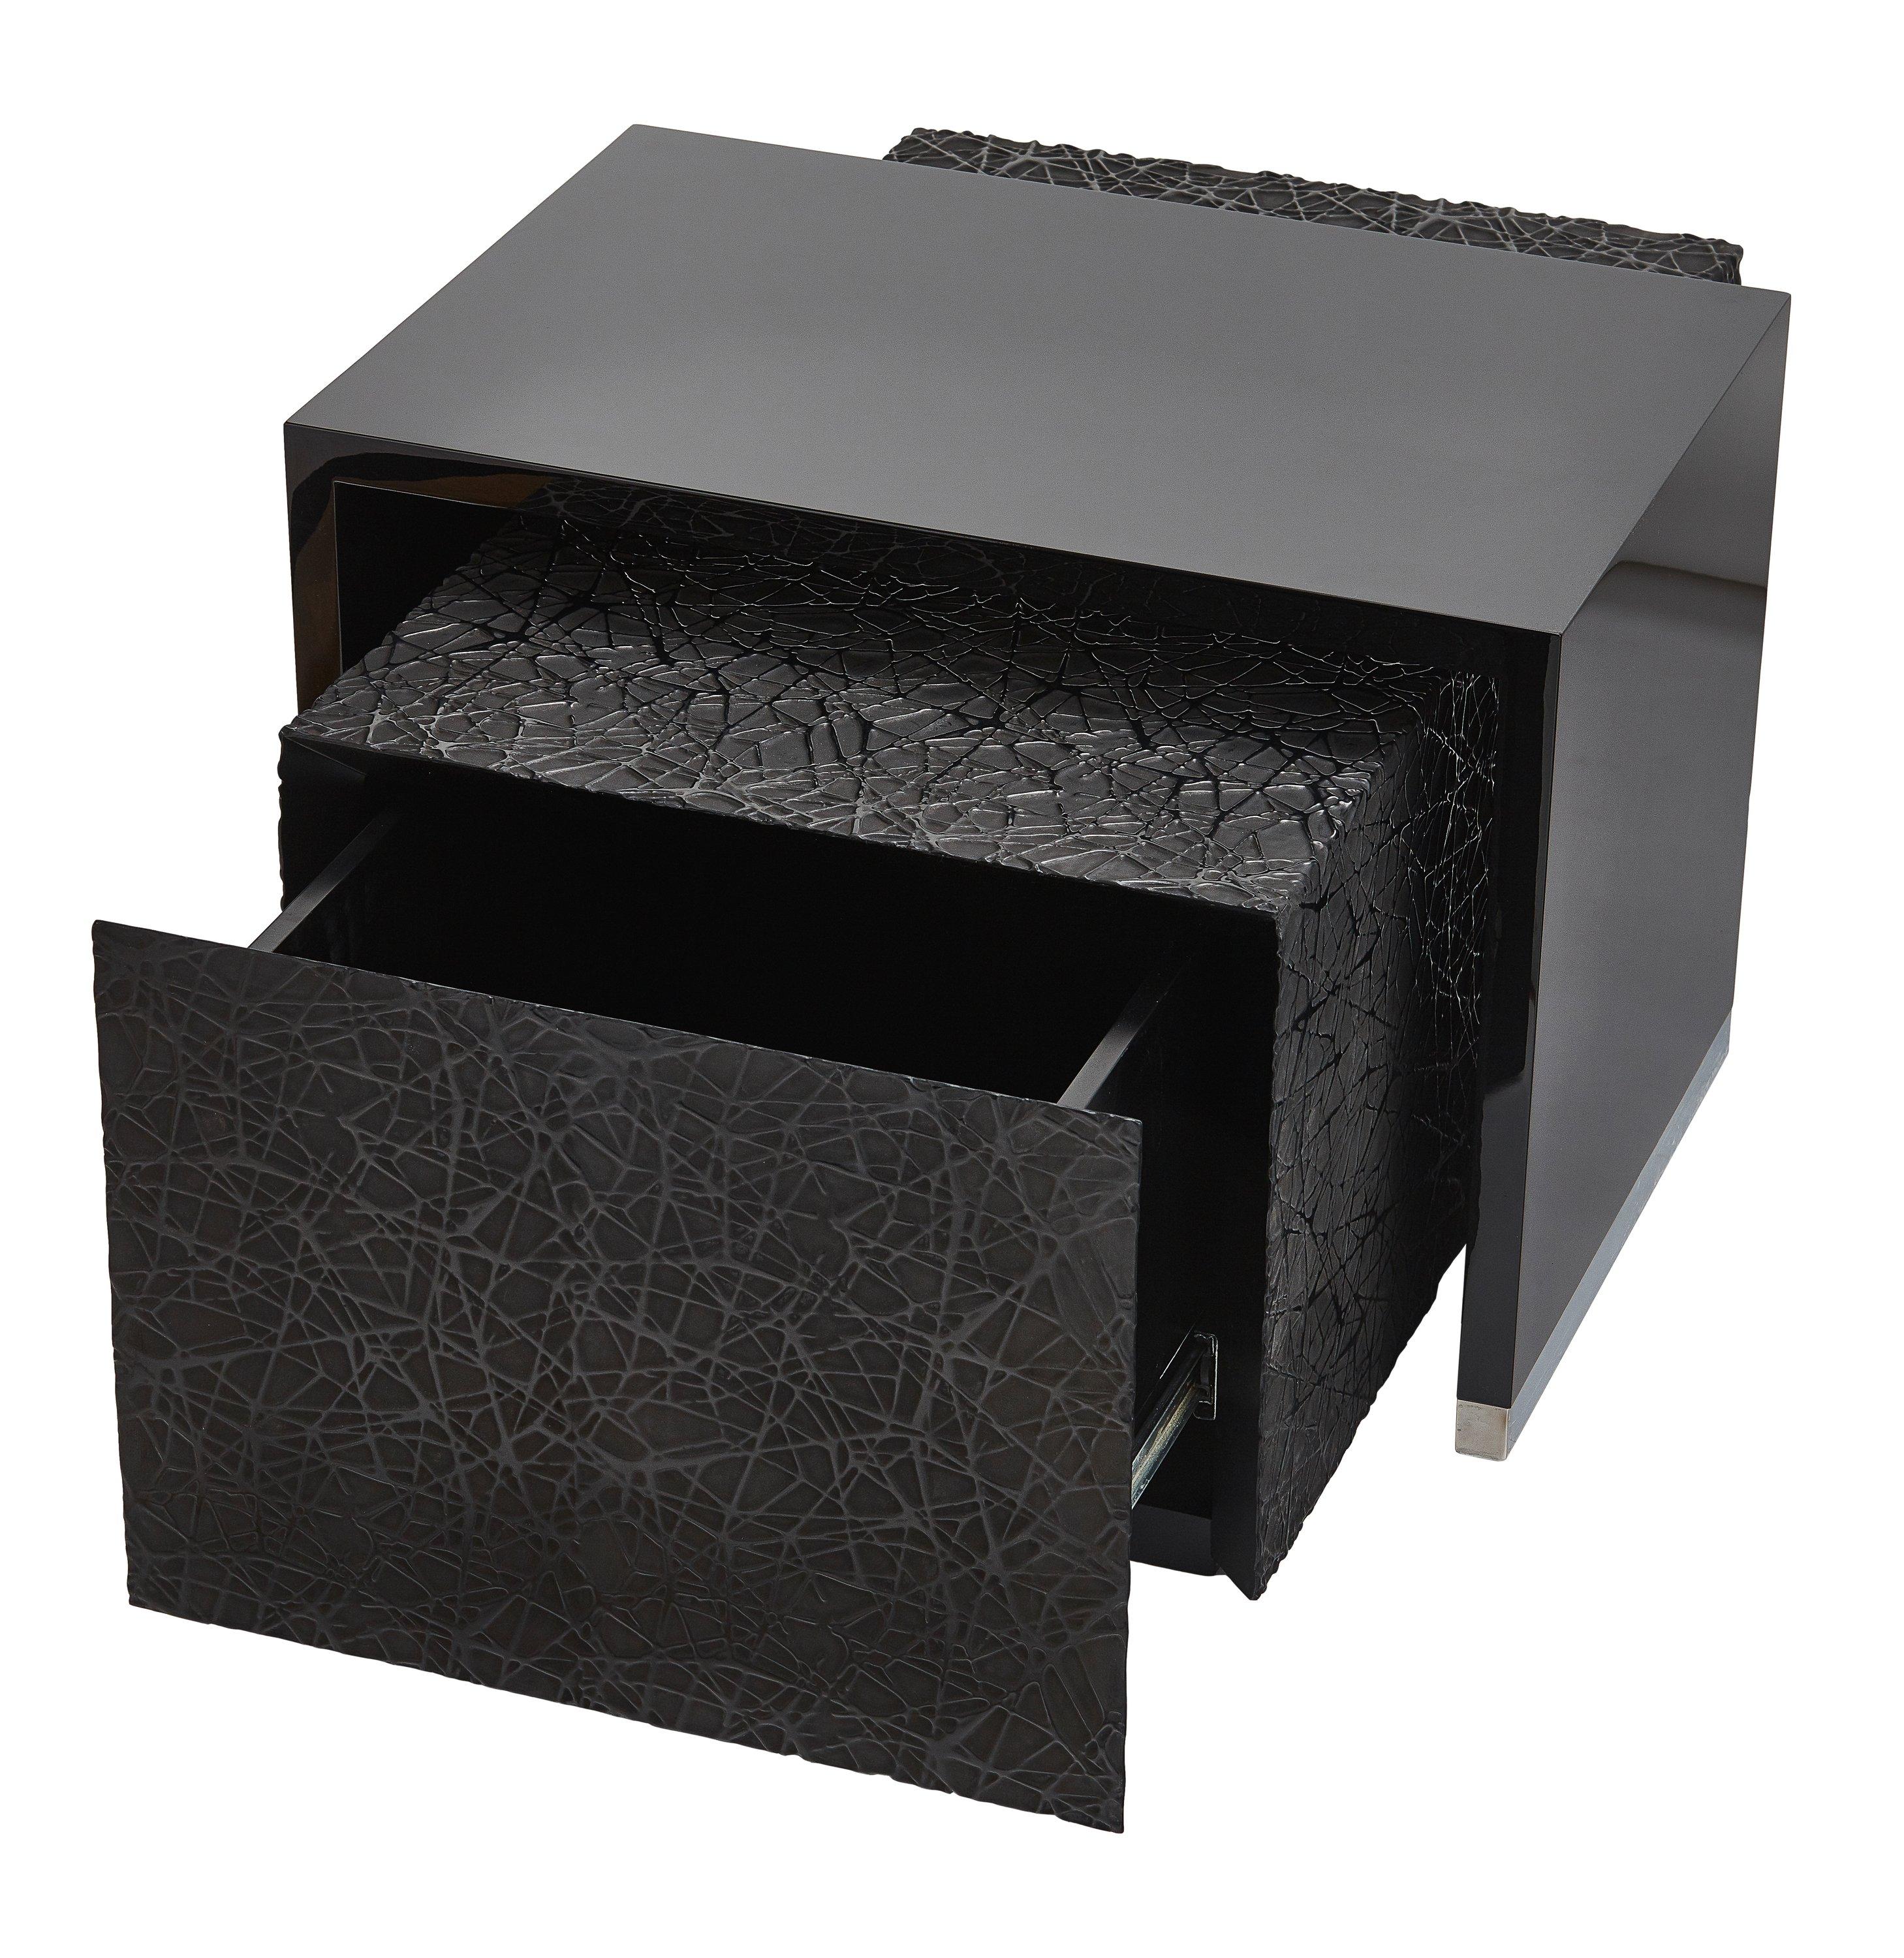 Polished Duo Side Tables with Piano Black Lacquer and Resin Art Texture, Customizable For Sale